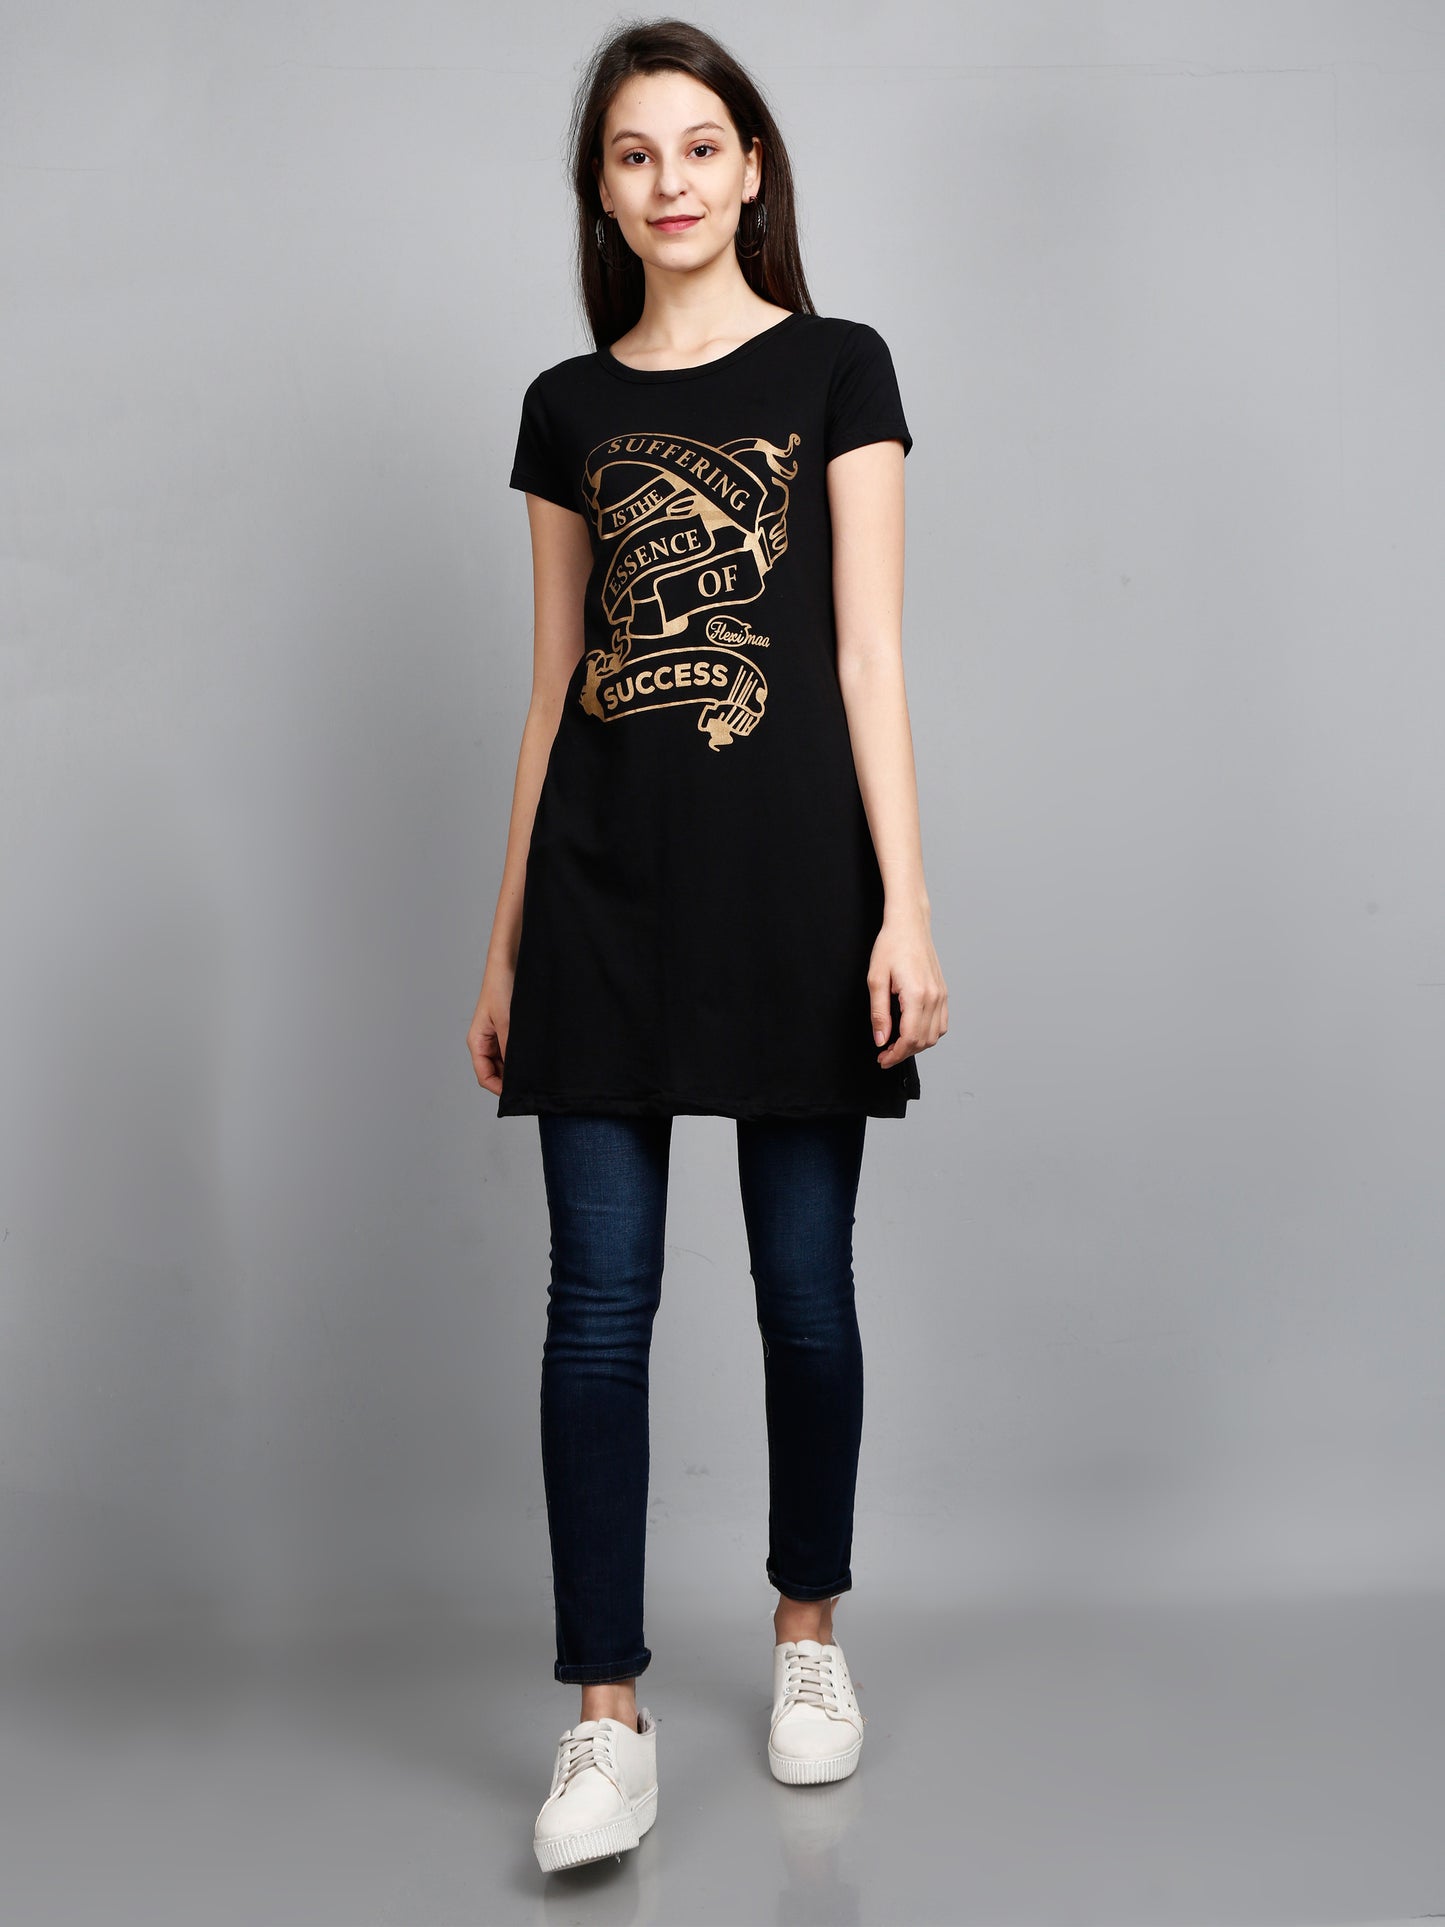 Women's Cotton Round Neck Black Color Long Top Chest Printed with Side Cut